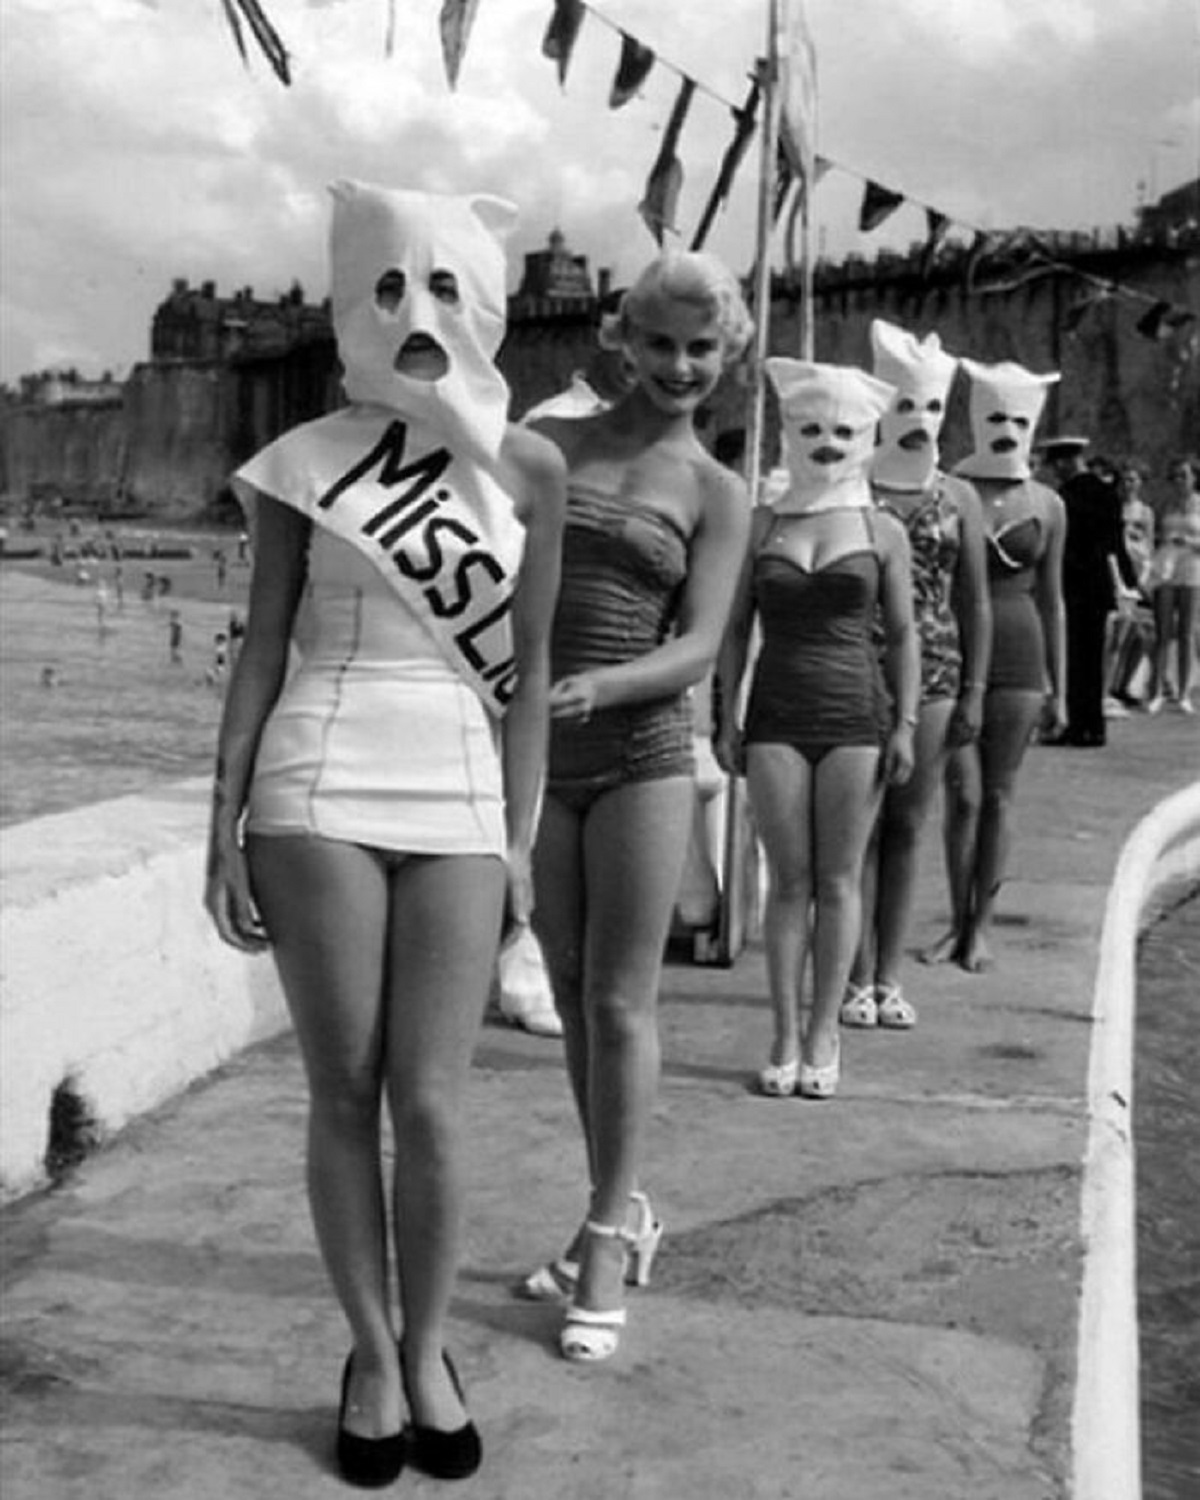 Apparently In The 1930s, Pageants Requiring The Contestants To Cover Their Faces Was Quite Commonplace, Whether For The Purpose Of Judging Only Their Bodies, Or Only Their Eyes, Which Are Both Scenarios